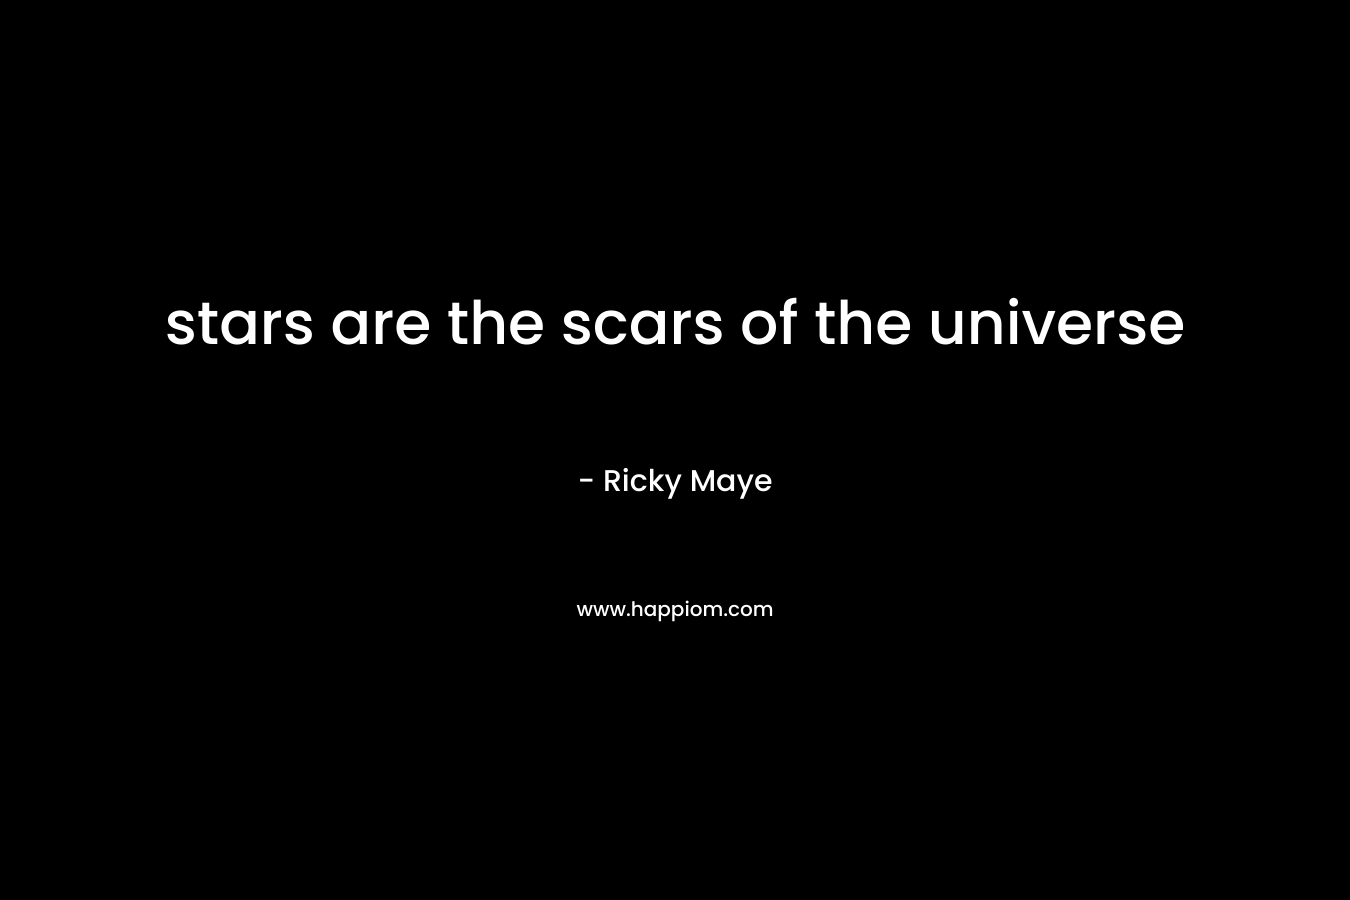 stars are the scars of the universe